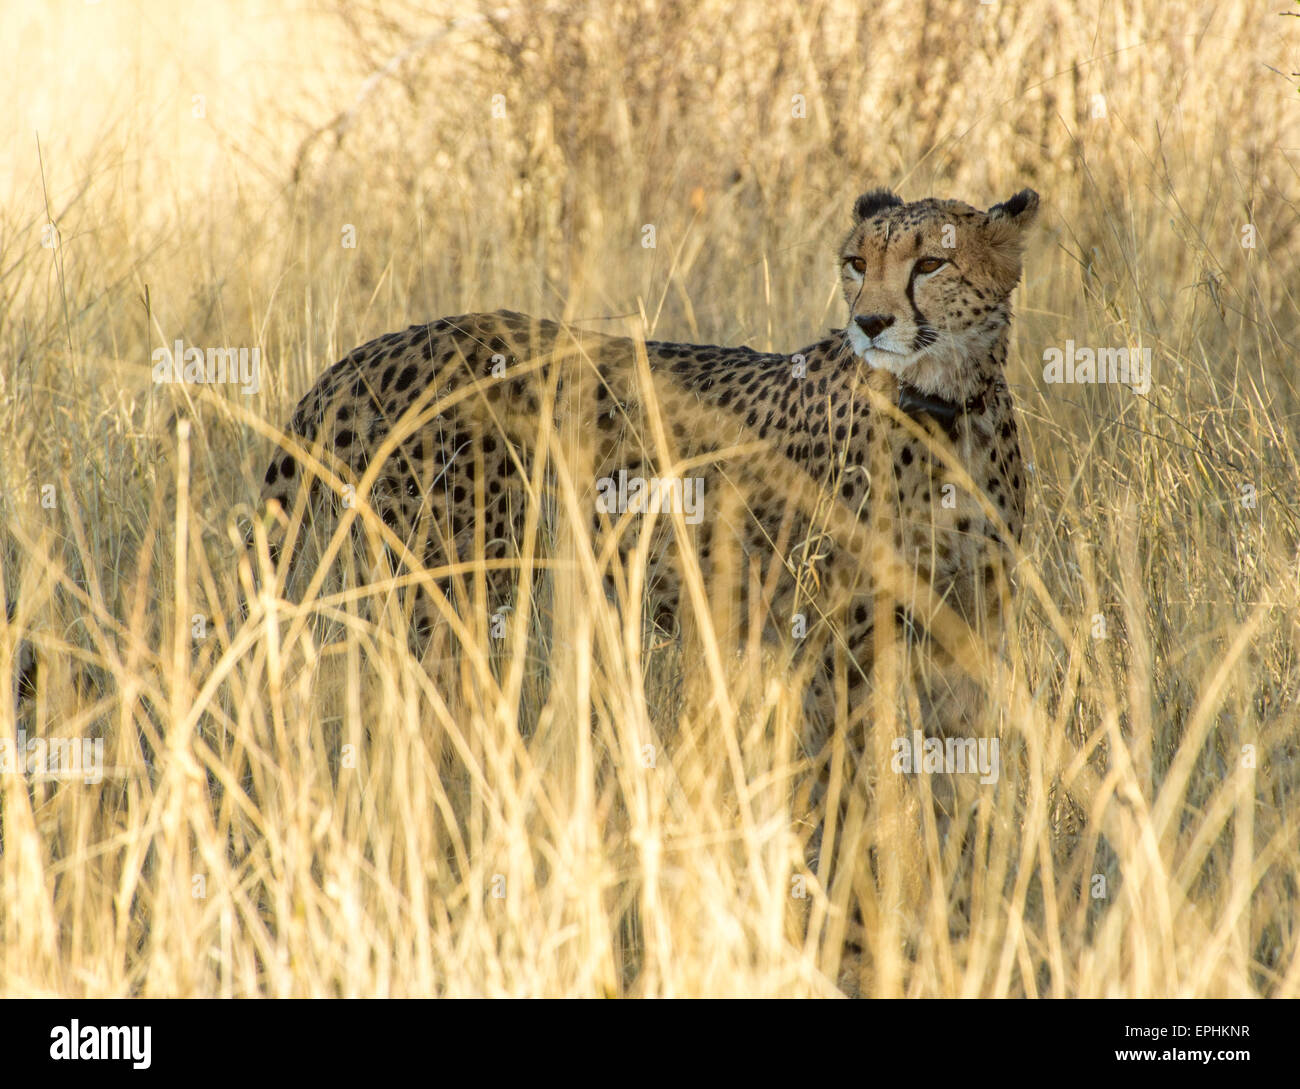 Africa, Namibia. AfriCat Foundation. Single cheetah staring off into distance. Stock Photo